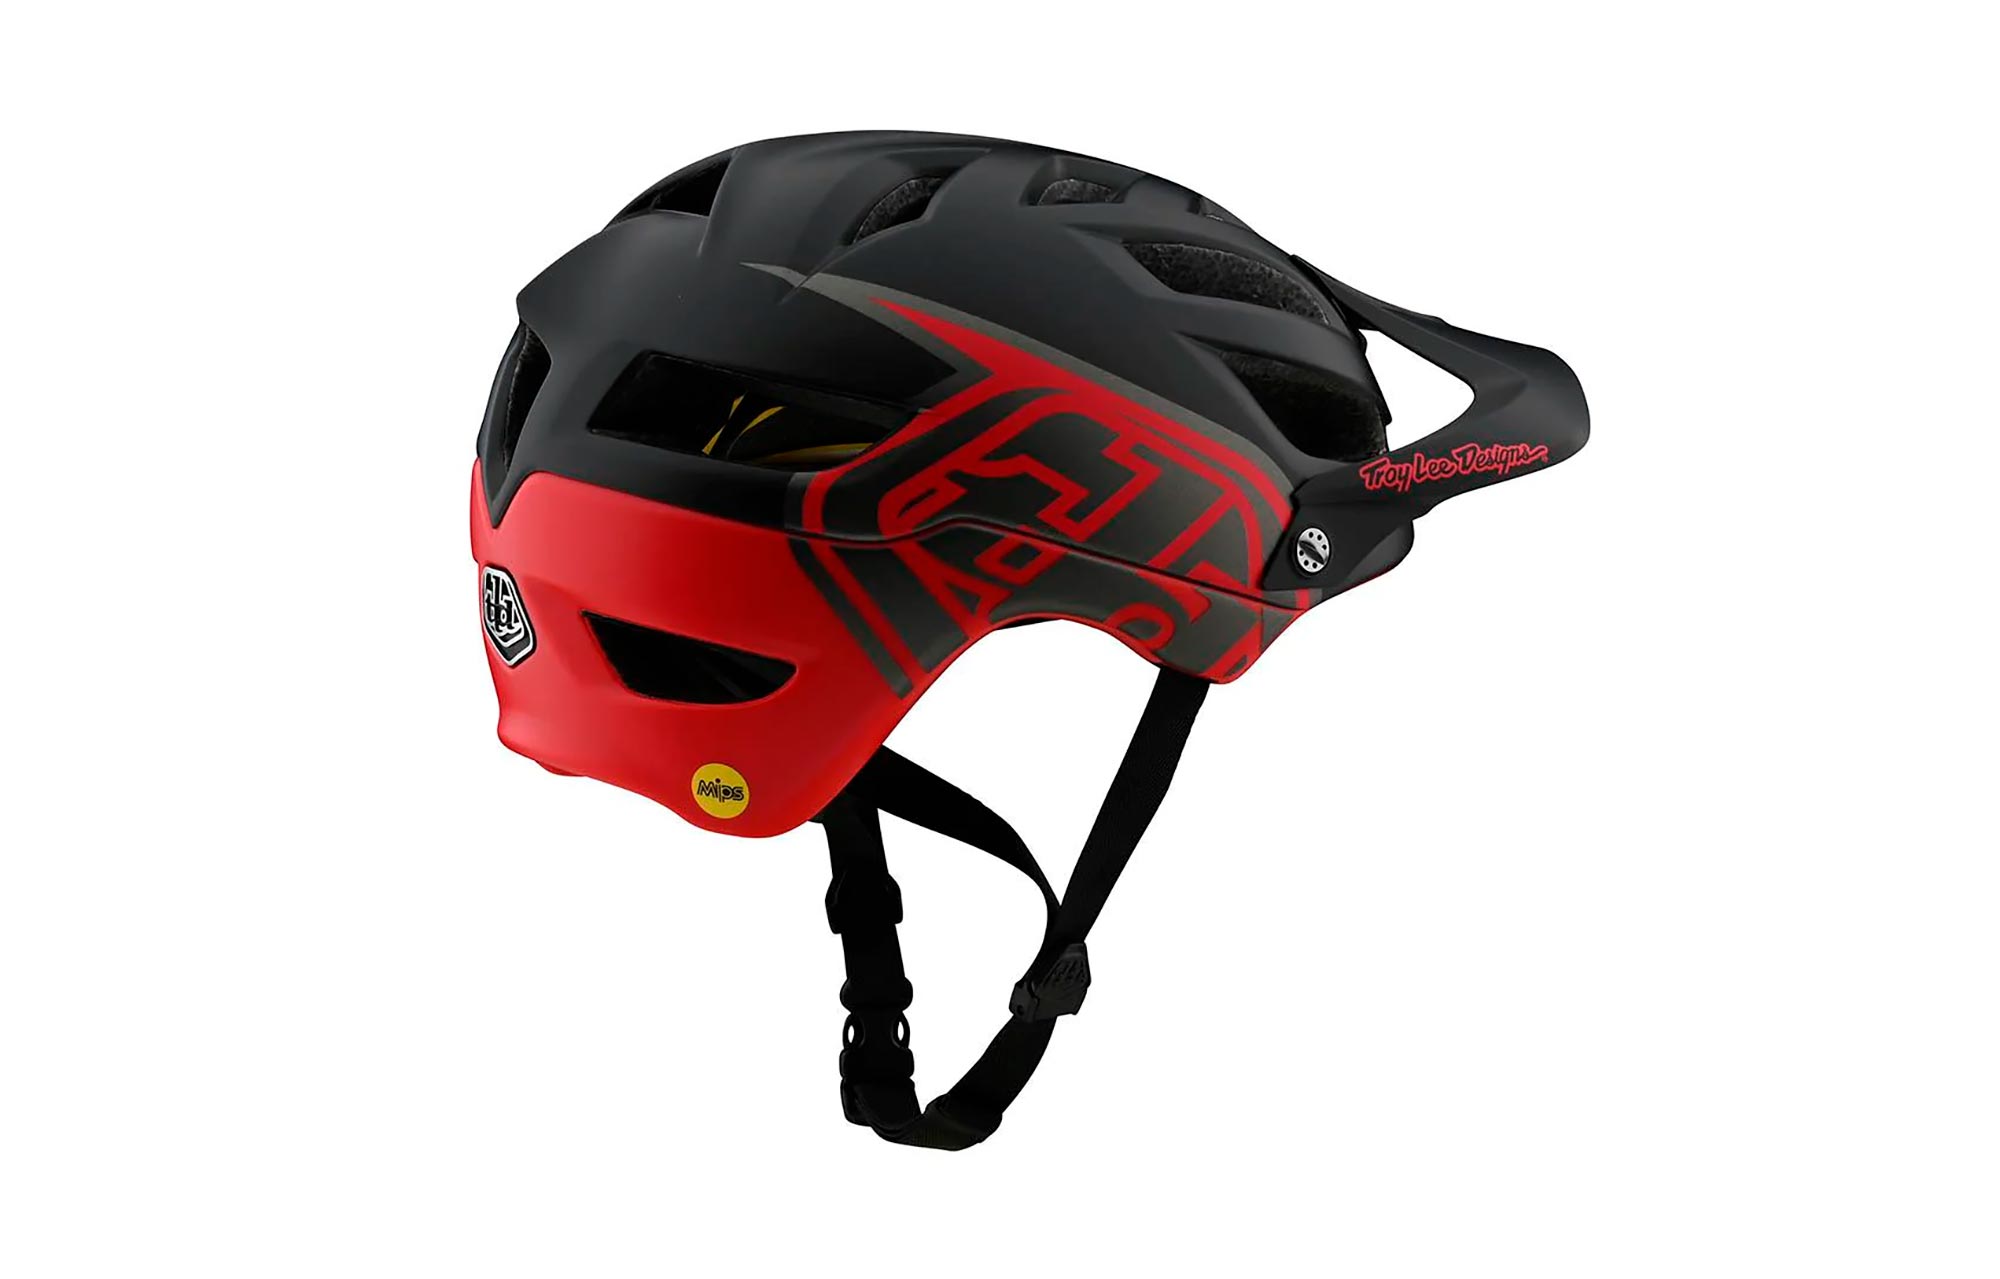 CASCO TROY LEE A1 MIPS CLASSIC BLACK / RED image number 0